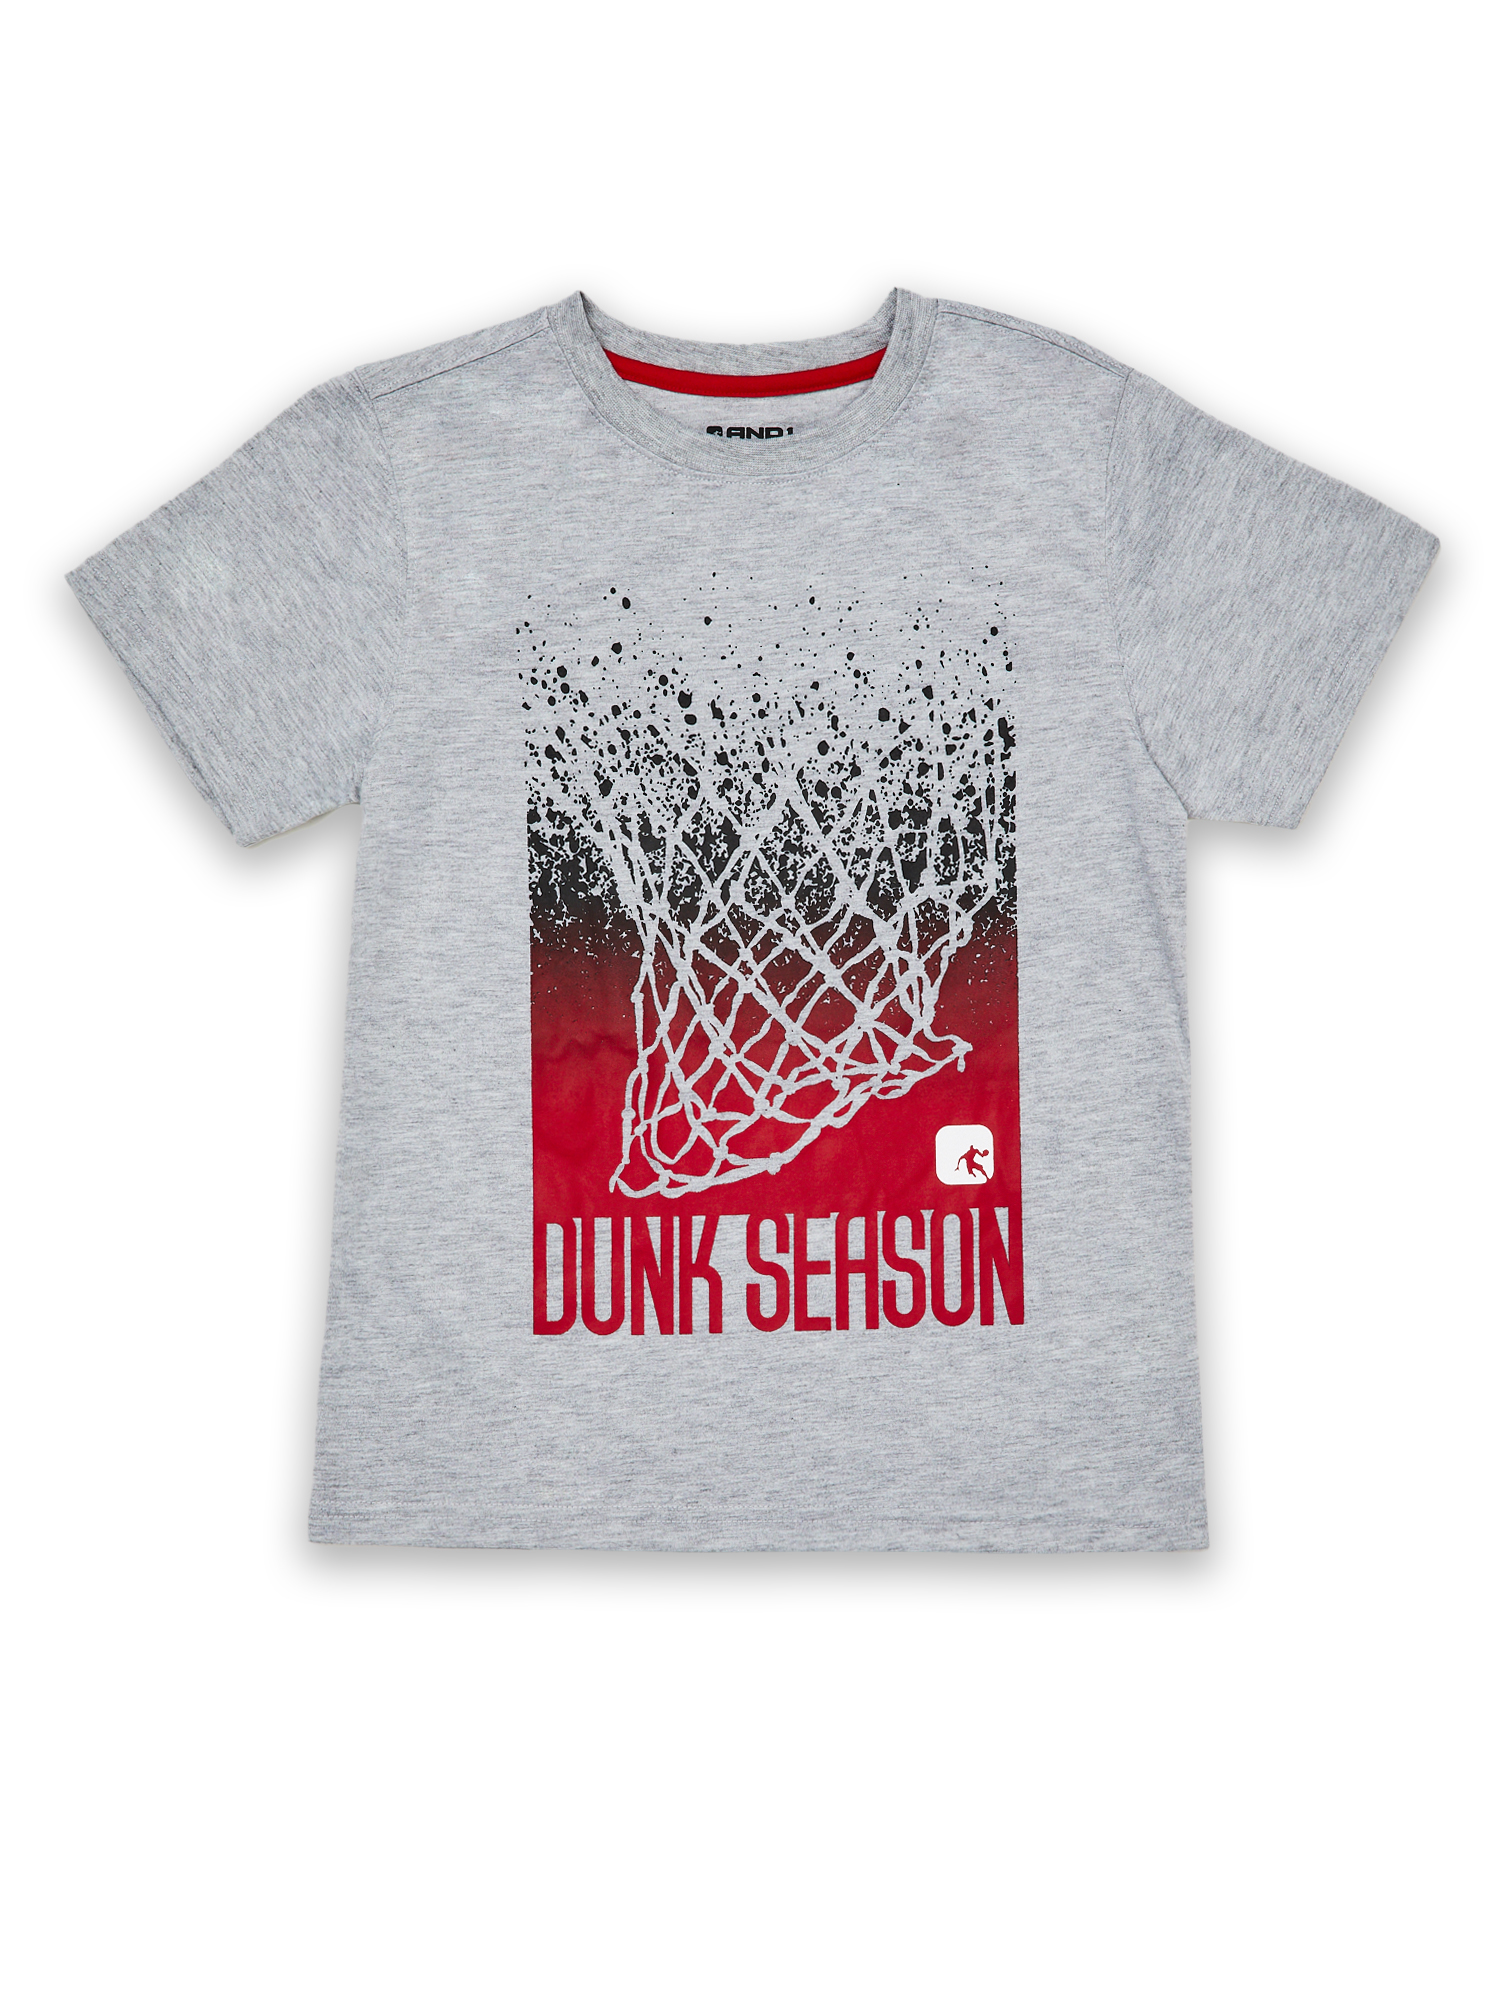 AND1 Boys Graphic Basketball Shirts 2-Pack, Sizes 4-18